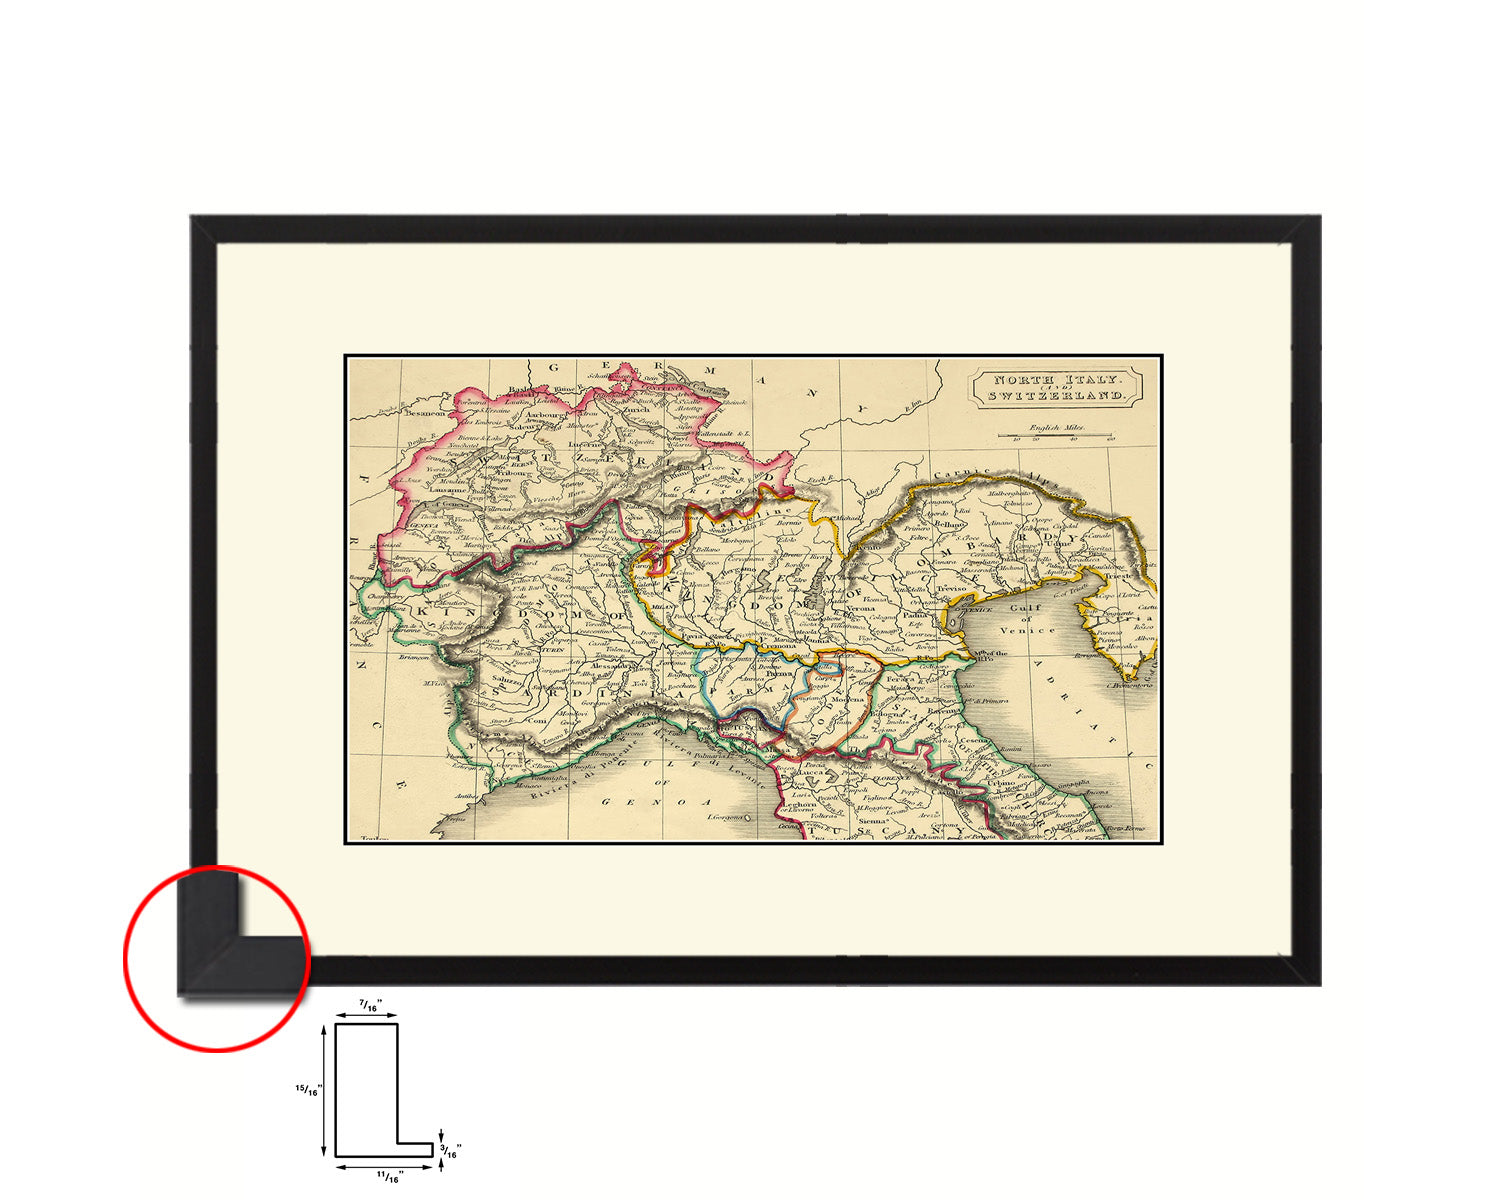 Northern Italy Old Map Framed Print Art Wall Decor Gifts